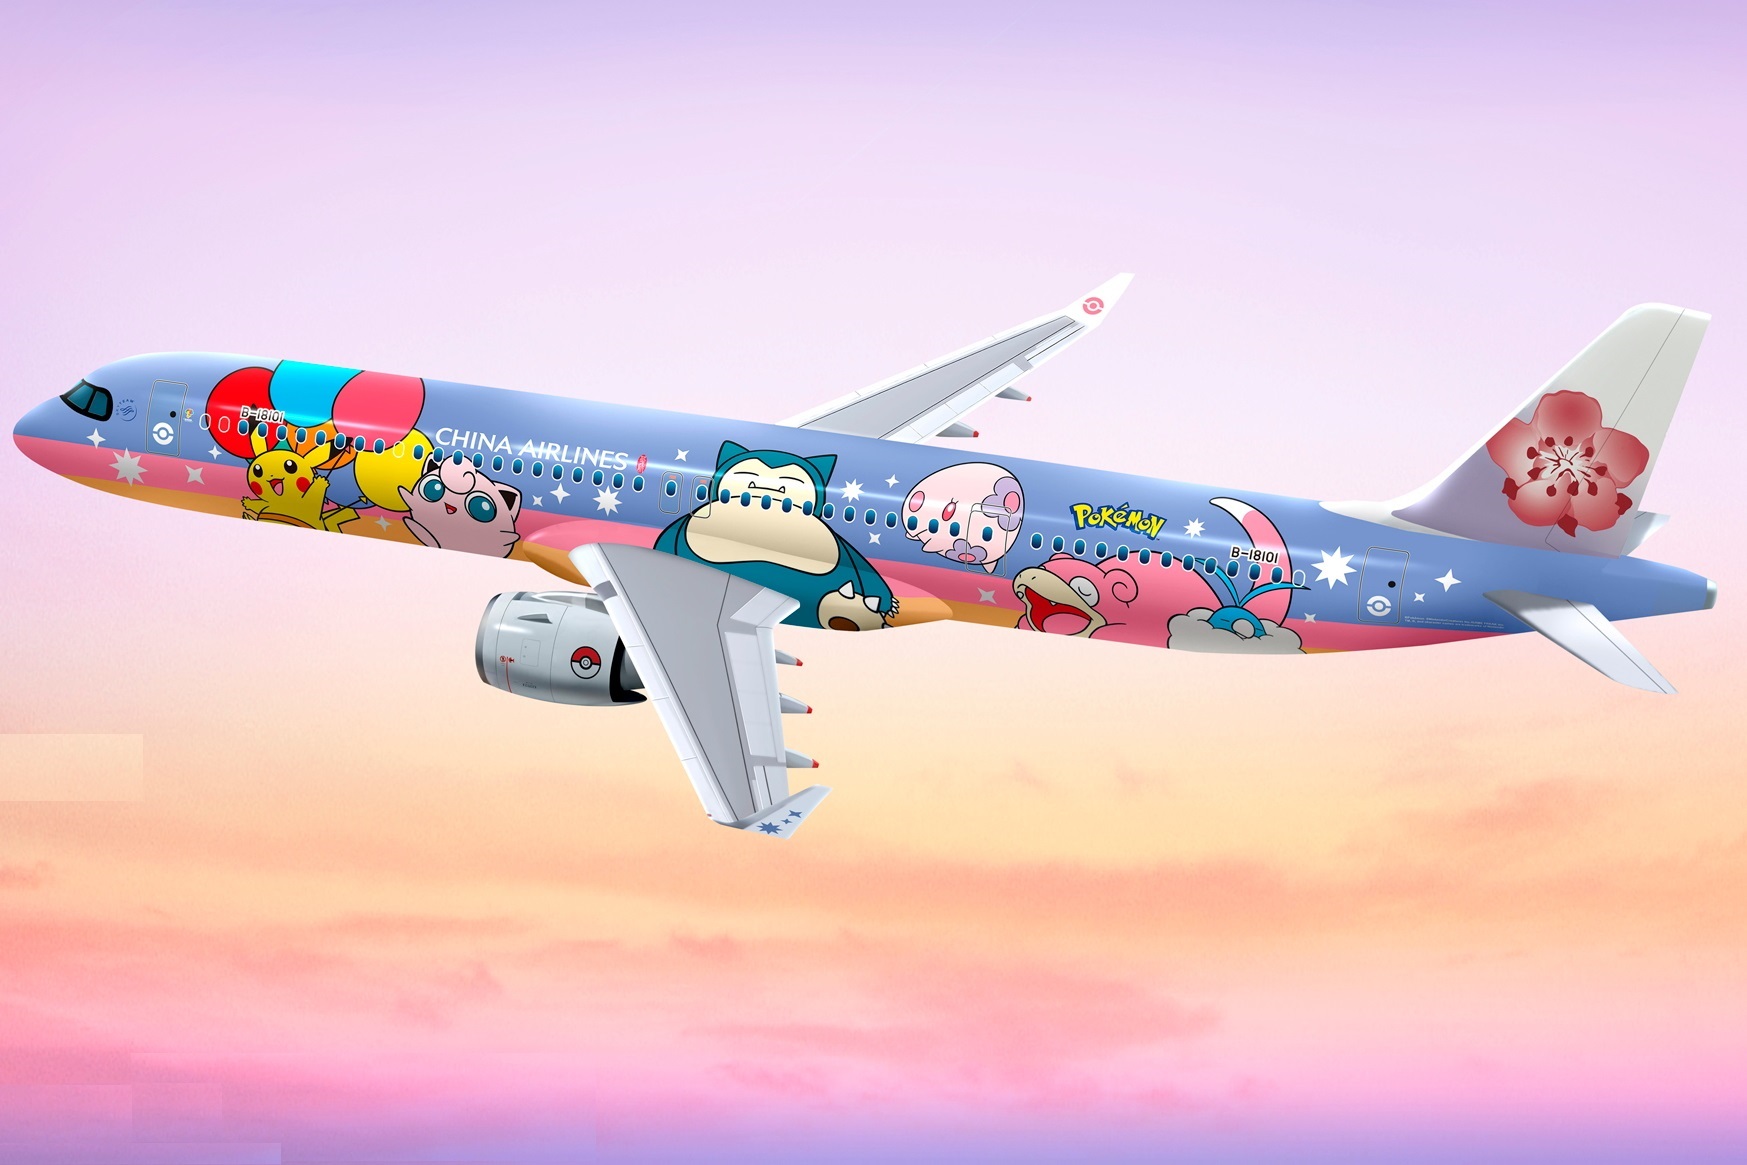 The custom livery was designed exclusively for China Airlines by The Pokémon Company. Click to enlarge.